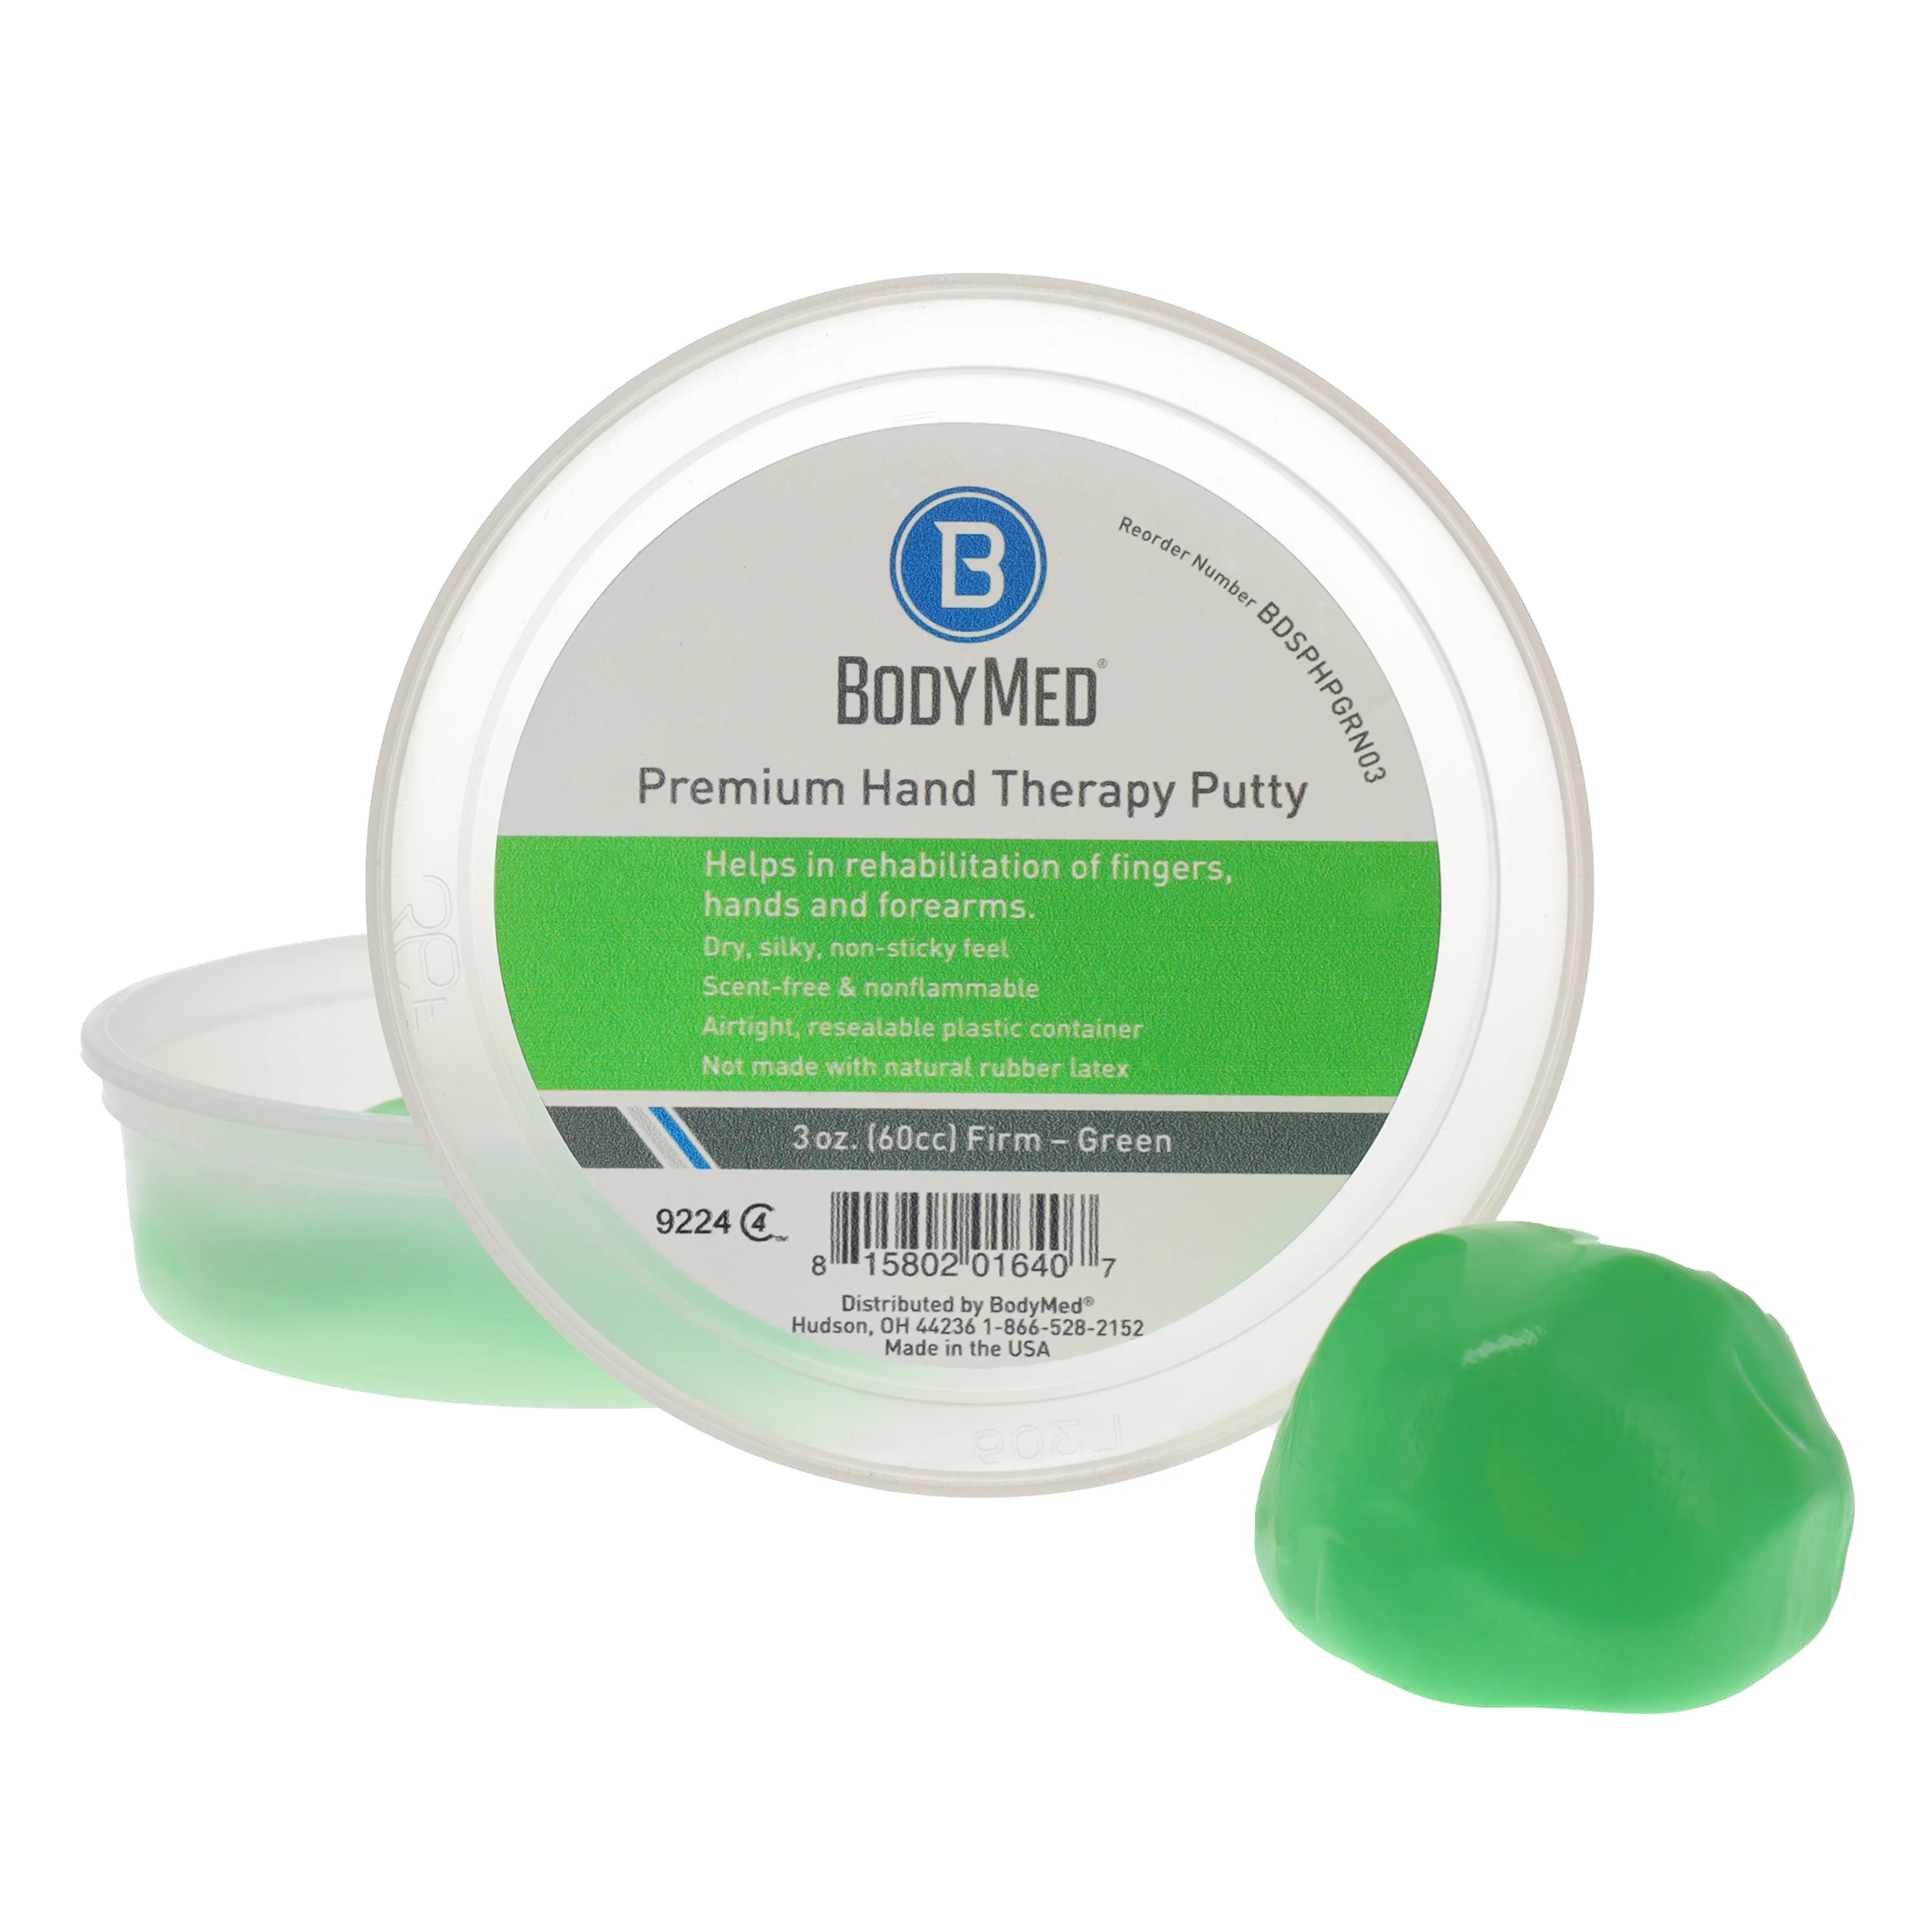 Bodymed - BDSPHPGRN03 - Premium Hand Therapy Putty - Firm